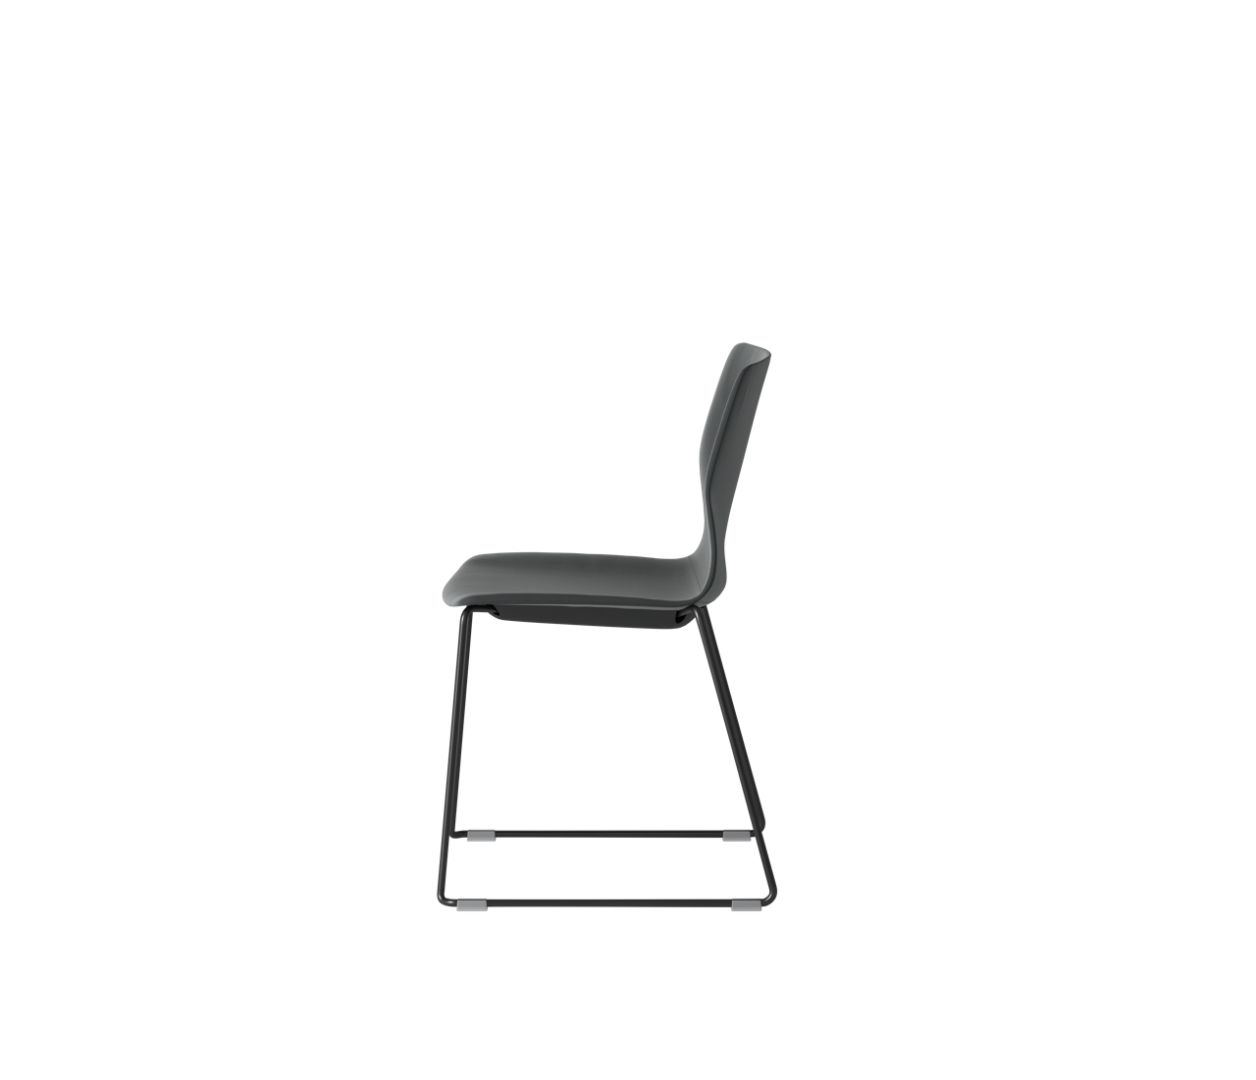 OCEE&FOUR – Chairs – FourSure 88 – Plastic shell - Fully Upholstered - Skid frame - Packshot Image 2 Large